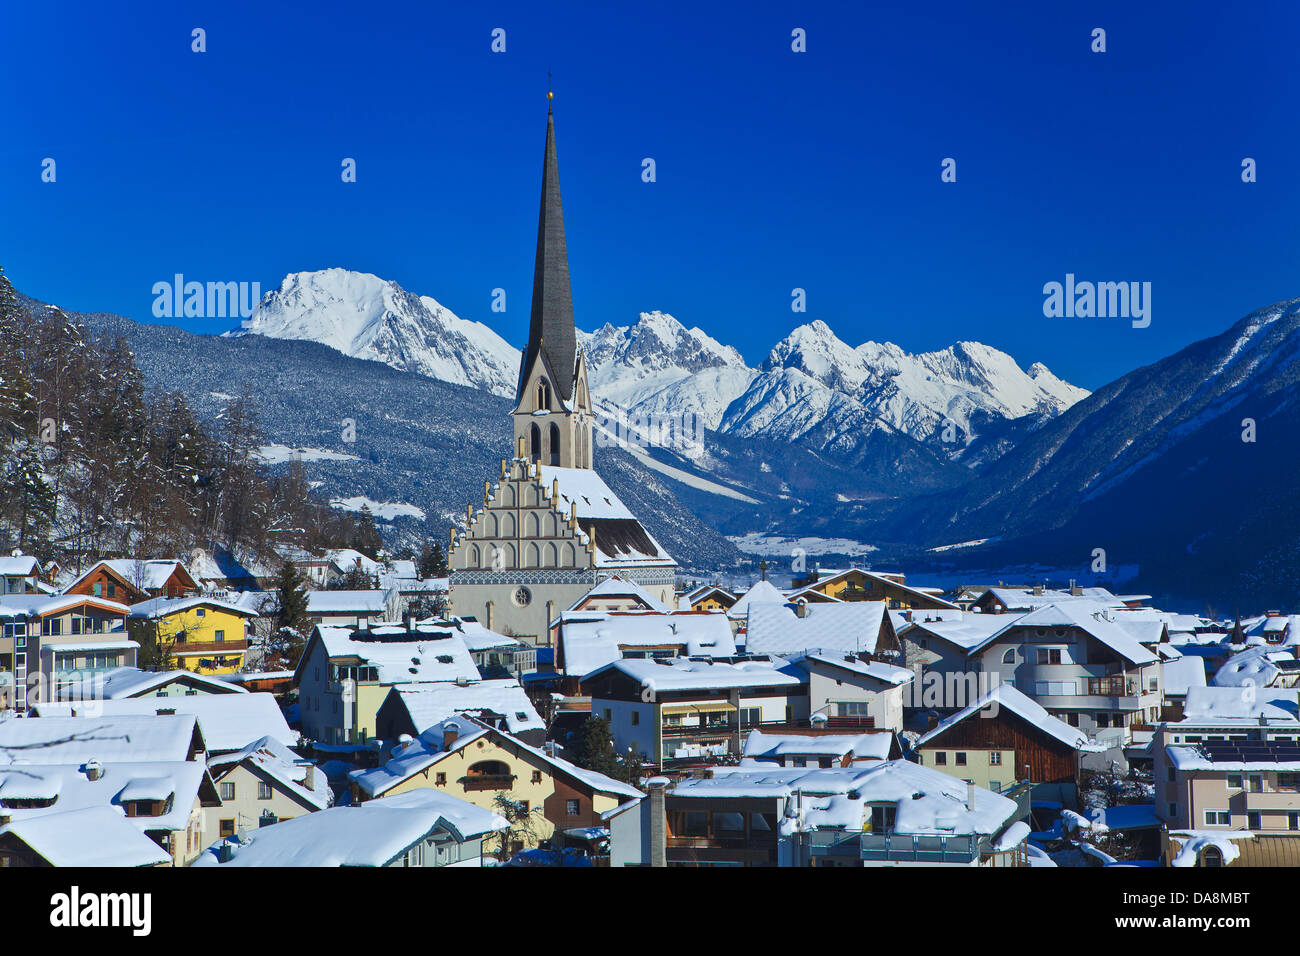 Austria, Europe, Tyrol, Oberinntal, Imst, district capital, winter, mountains, Mieminger chain, wood, forest, houses, homes, chu Stock Photo